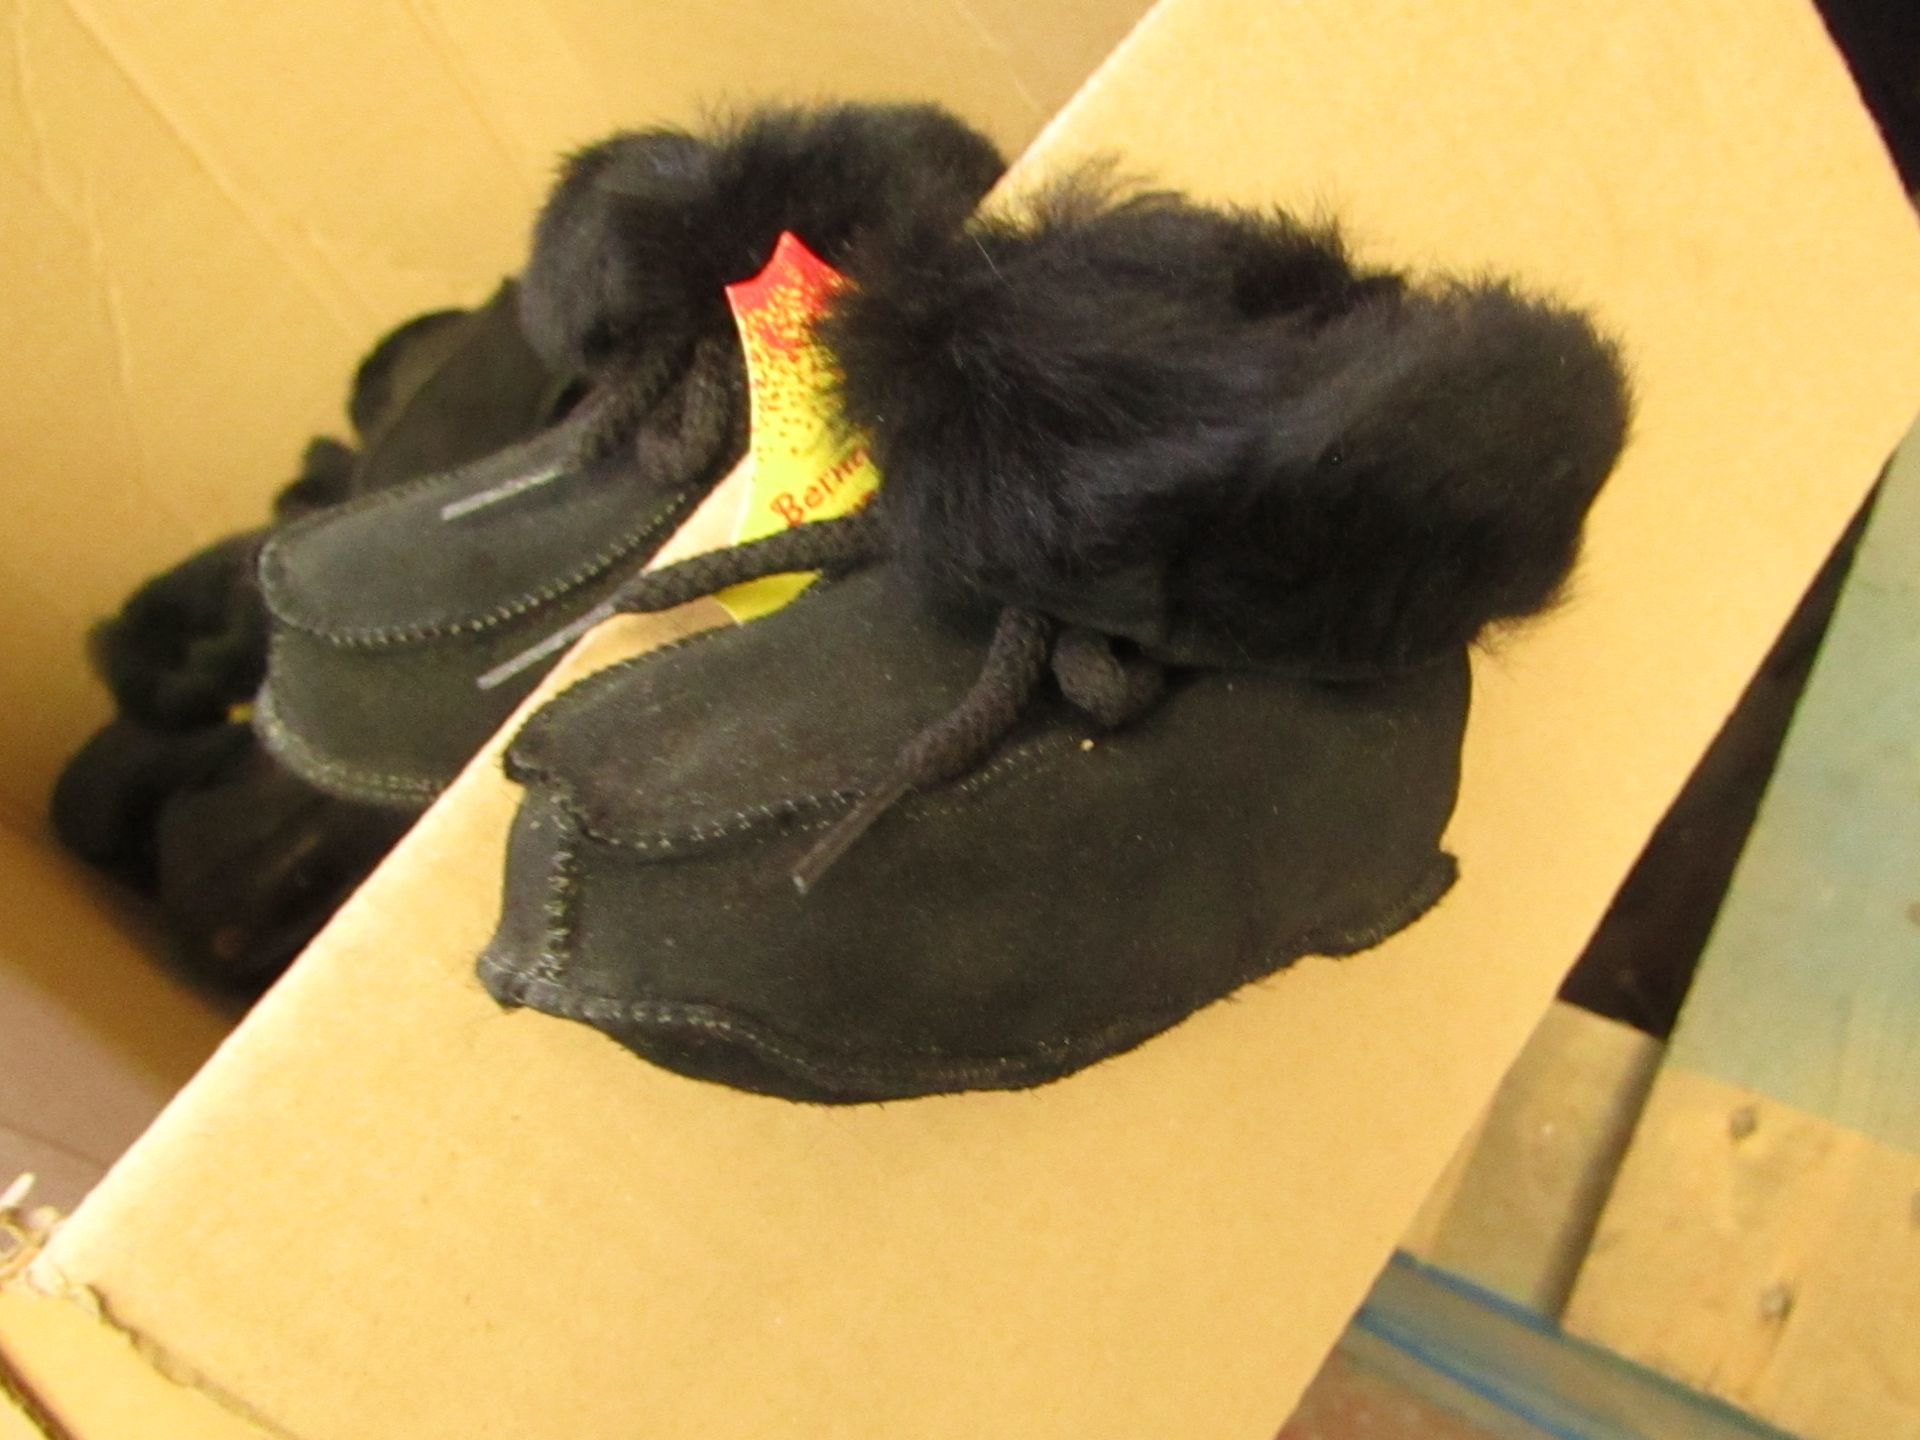 1x Pairs of Childs Sheepskin style Booties, unused, unknown size